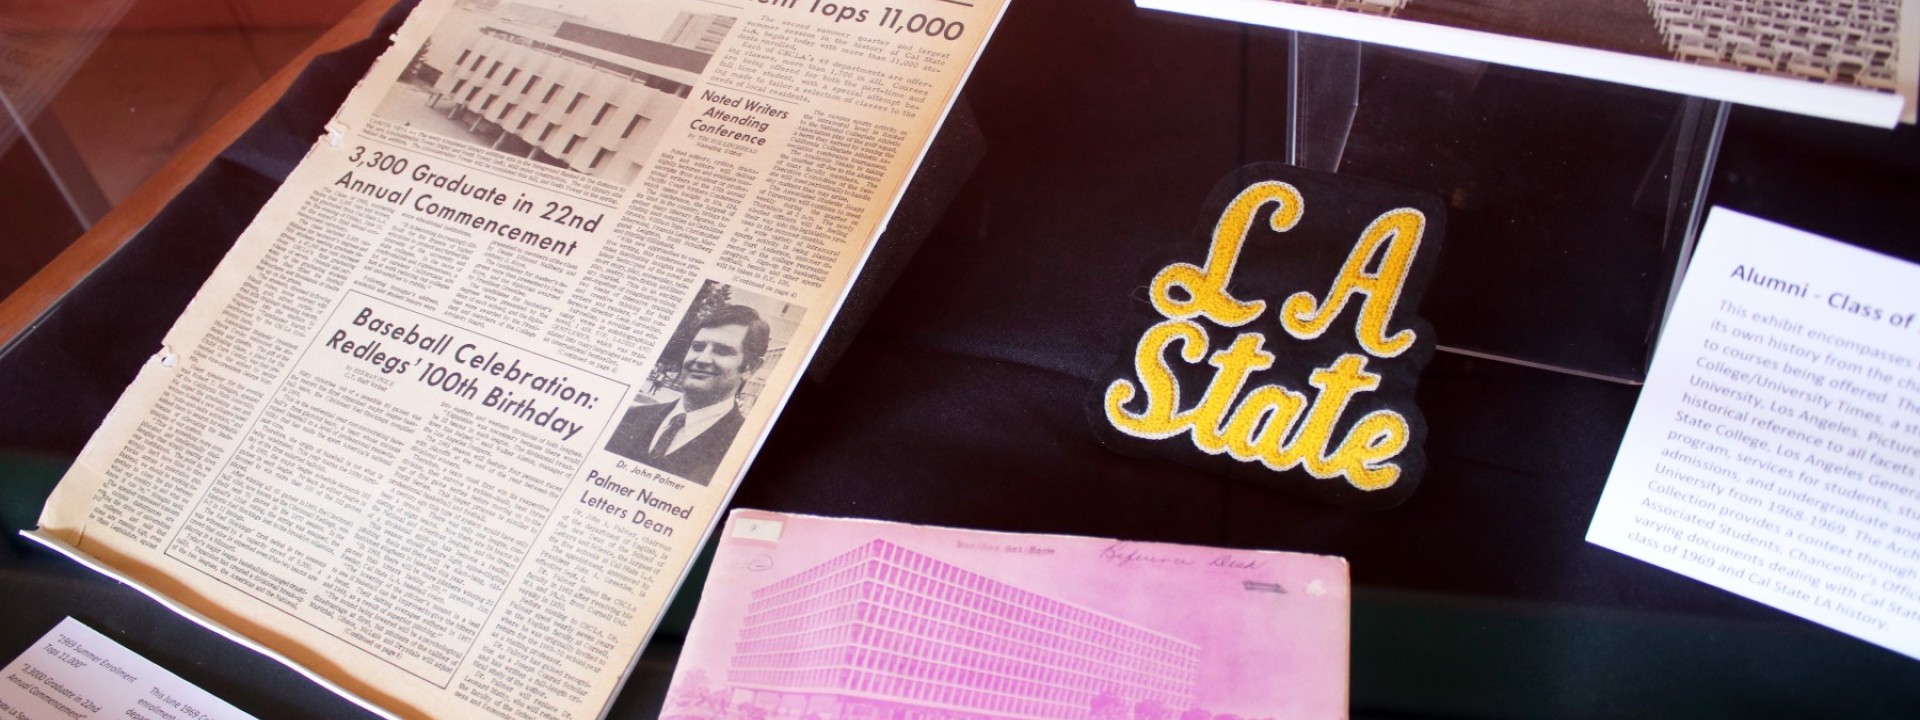 Alumni reunion memorabilia including a College Times issue from 1969 and LA State patch